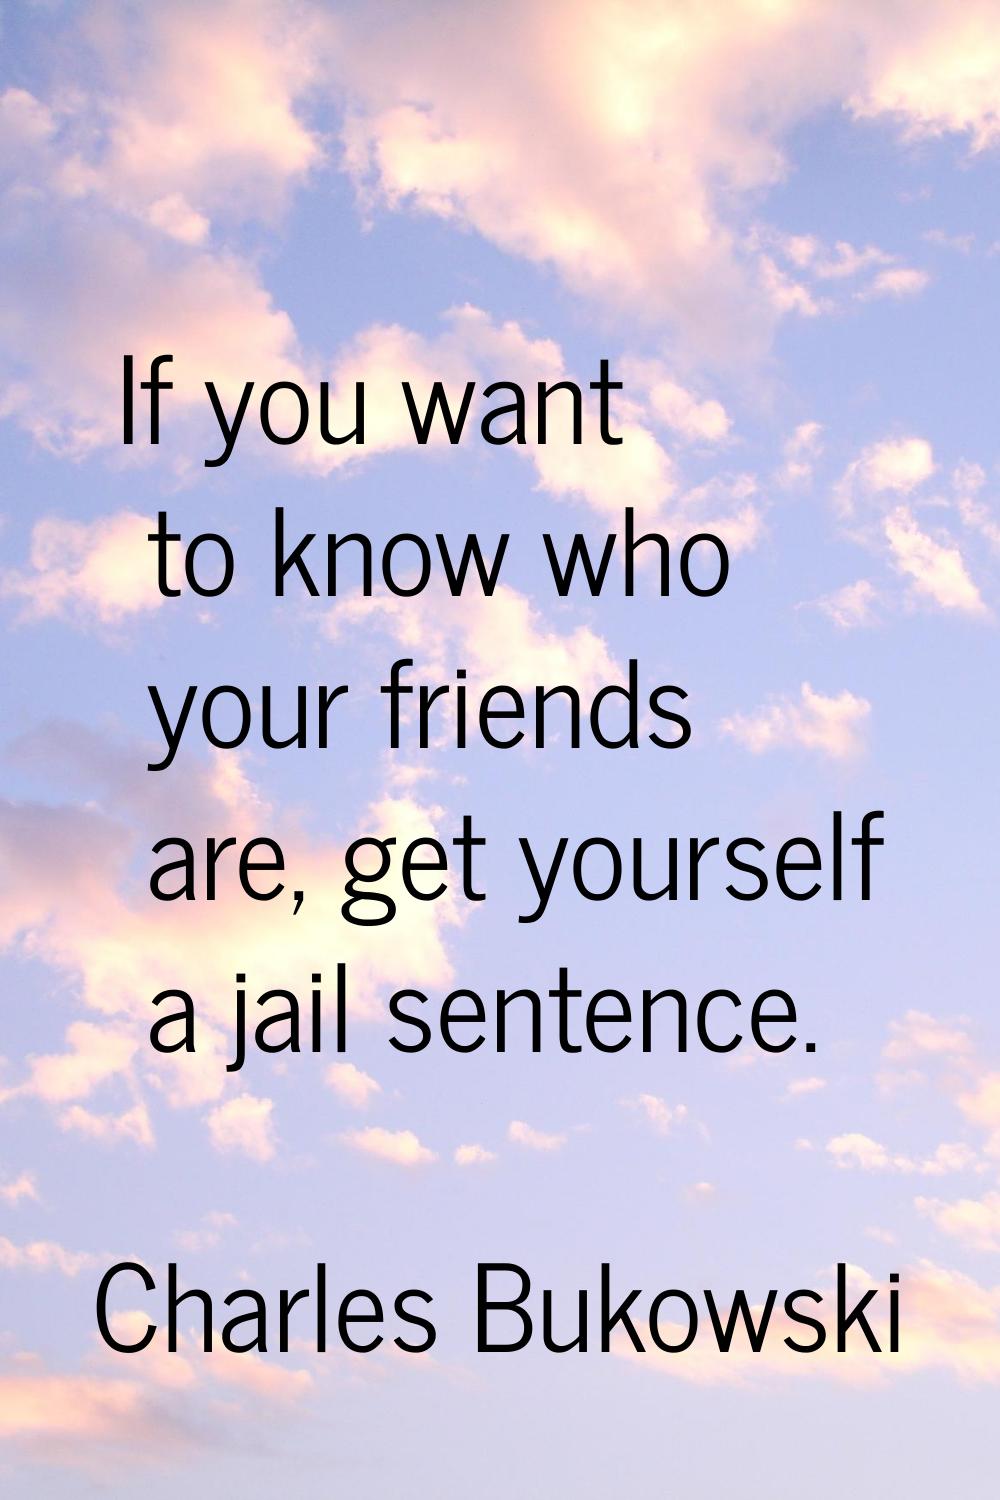 If you want to know who your friends are, get yourself a jail sentence.